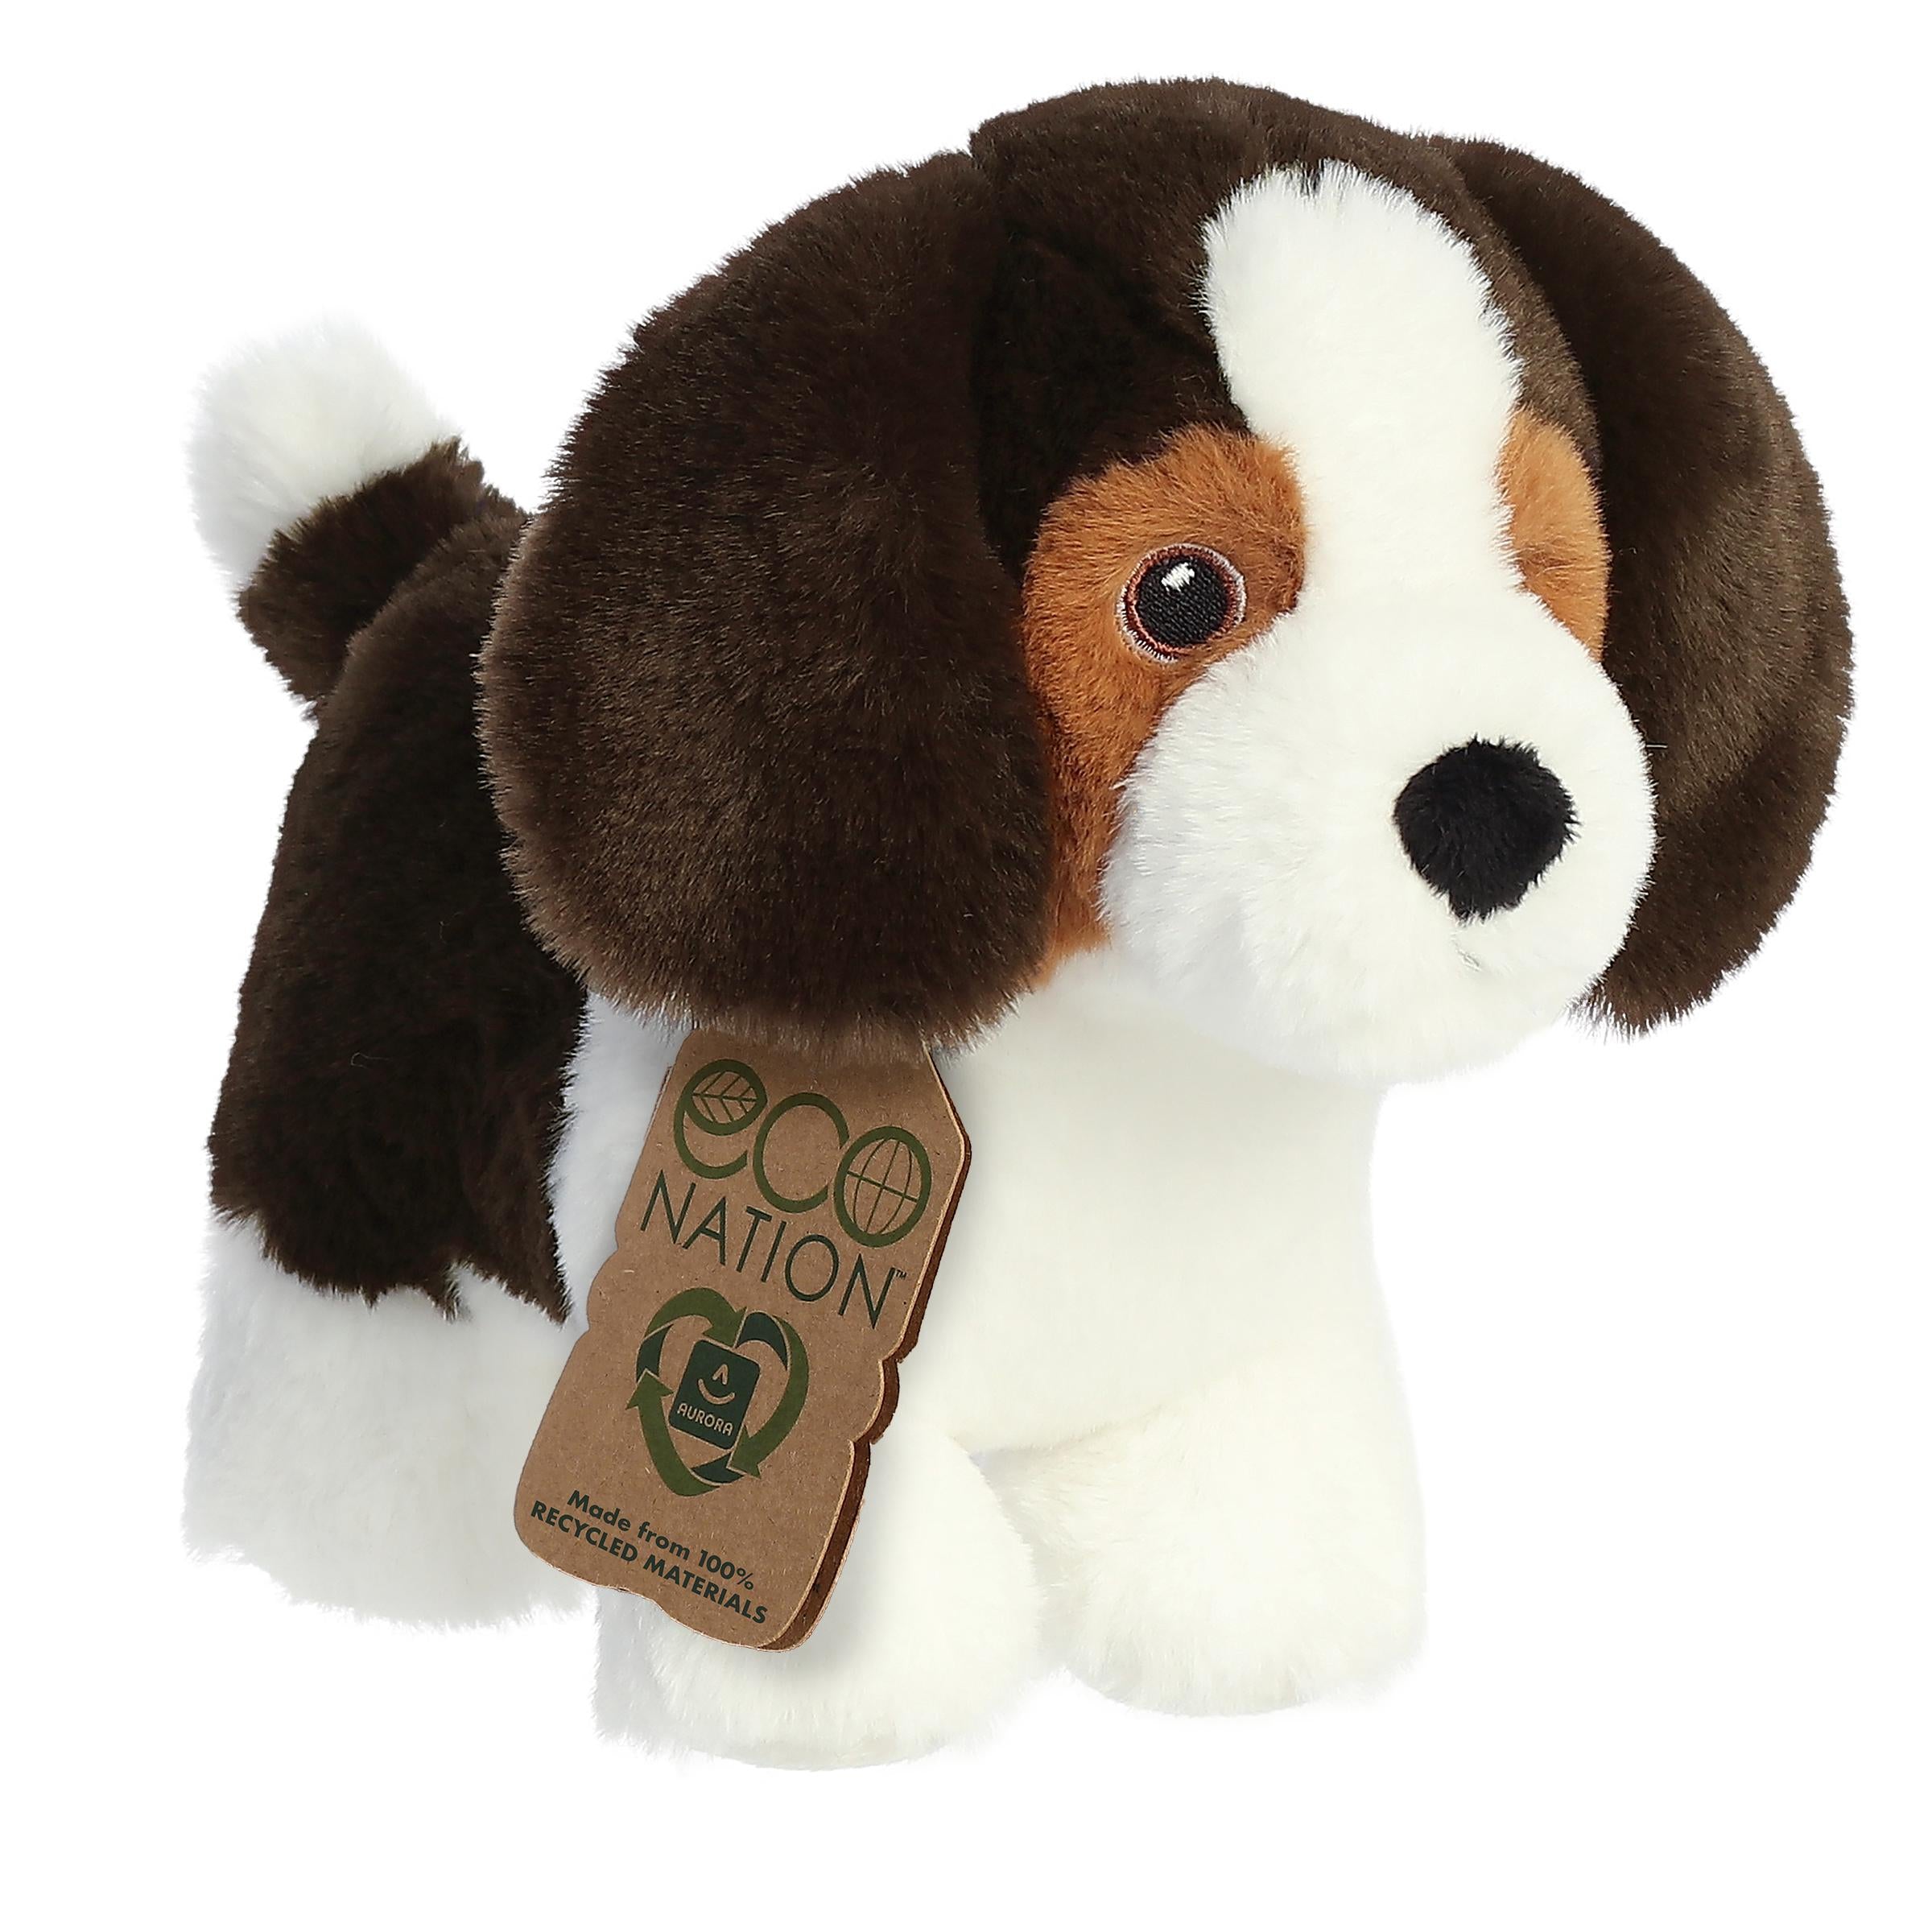 A precious beagle plush with a white and brown coat, sweet embroidered eyes, and an eco-nation collar tag